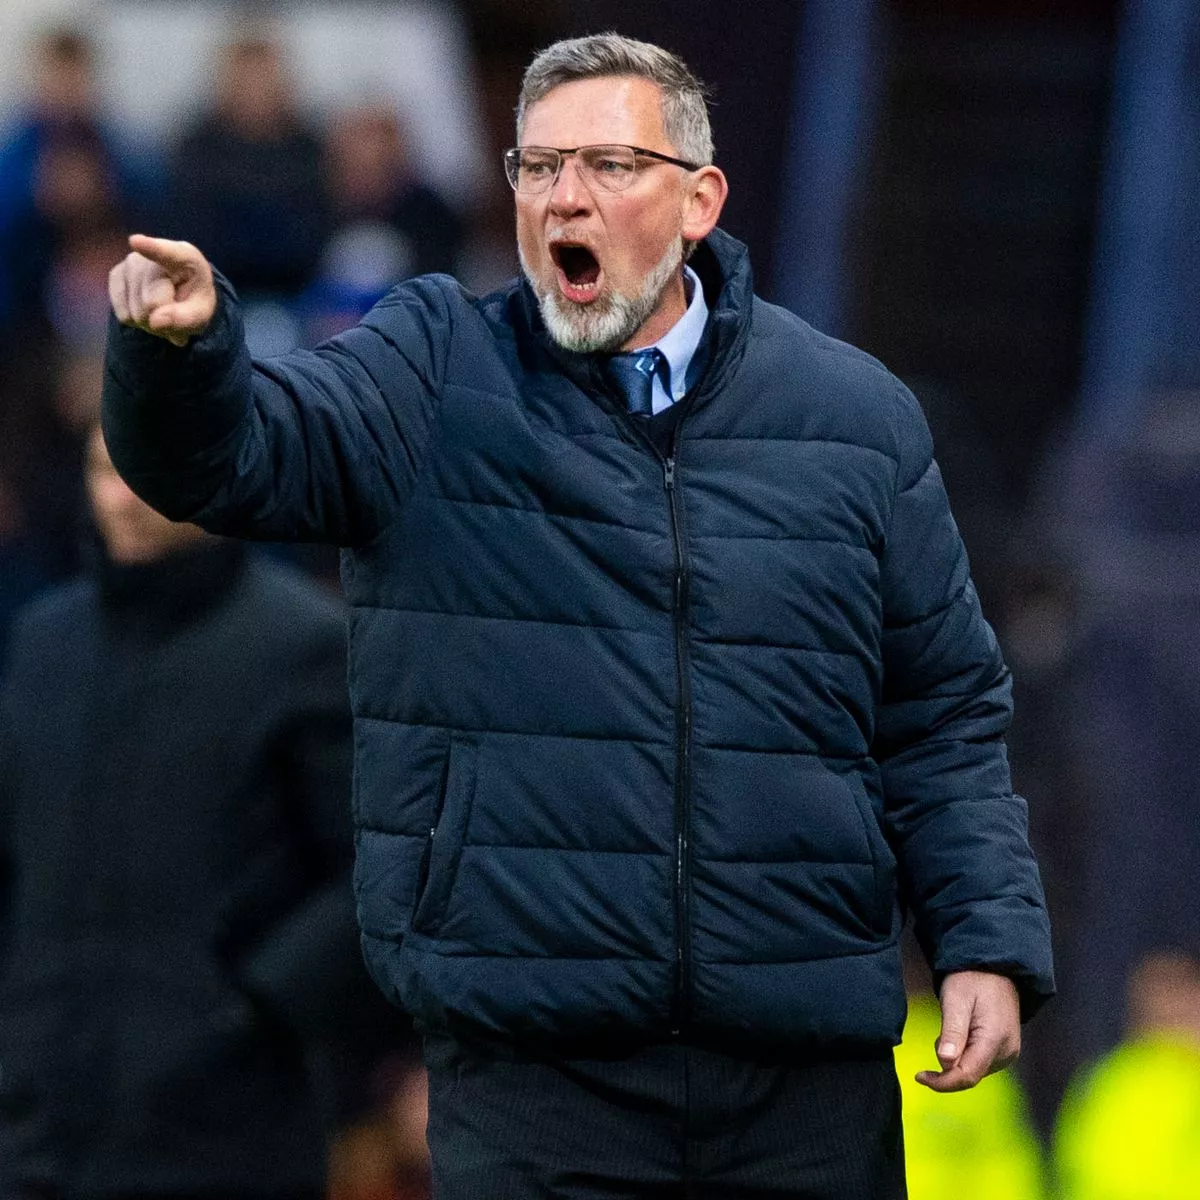 Craig Levein 'targeted' by Dundee United as club chiefs 'support' manager's return - Football Scotland